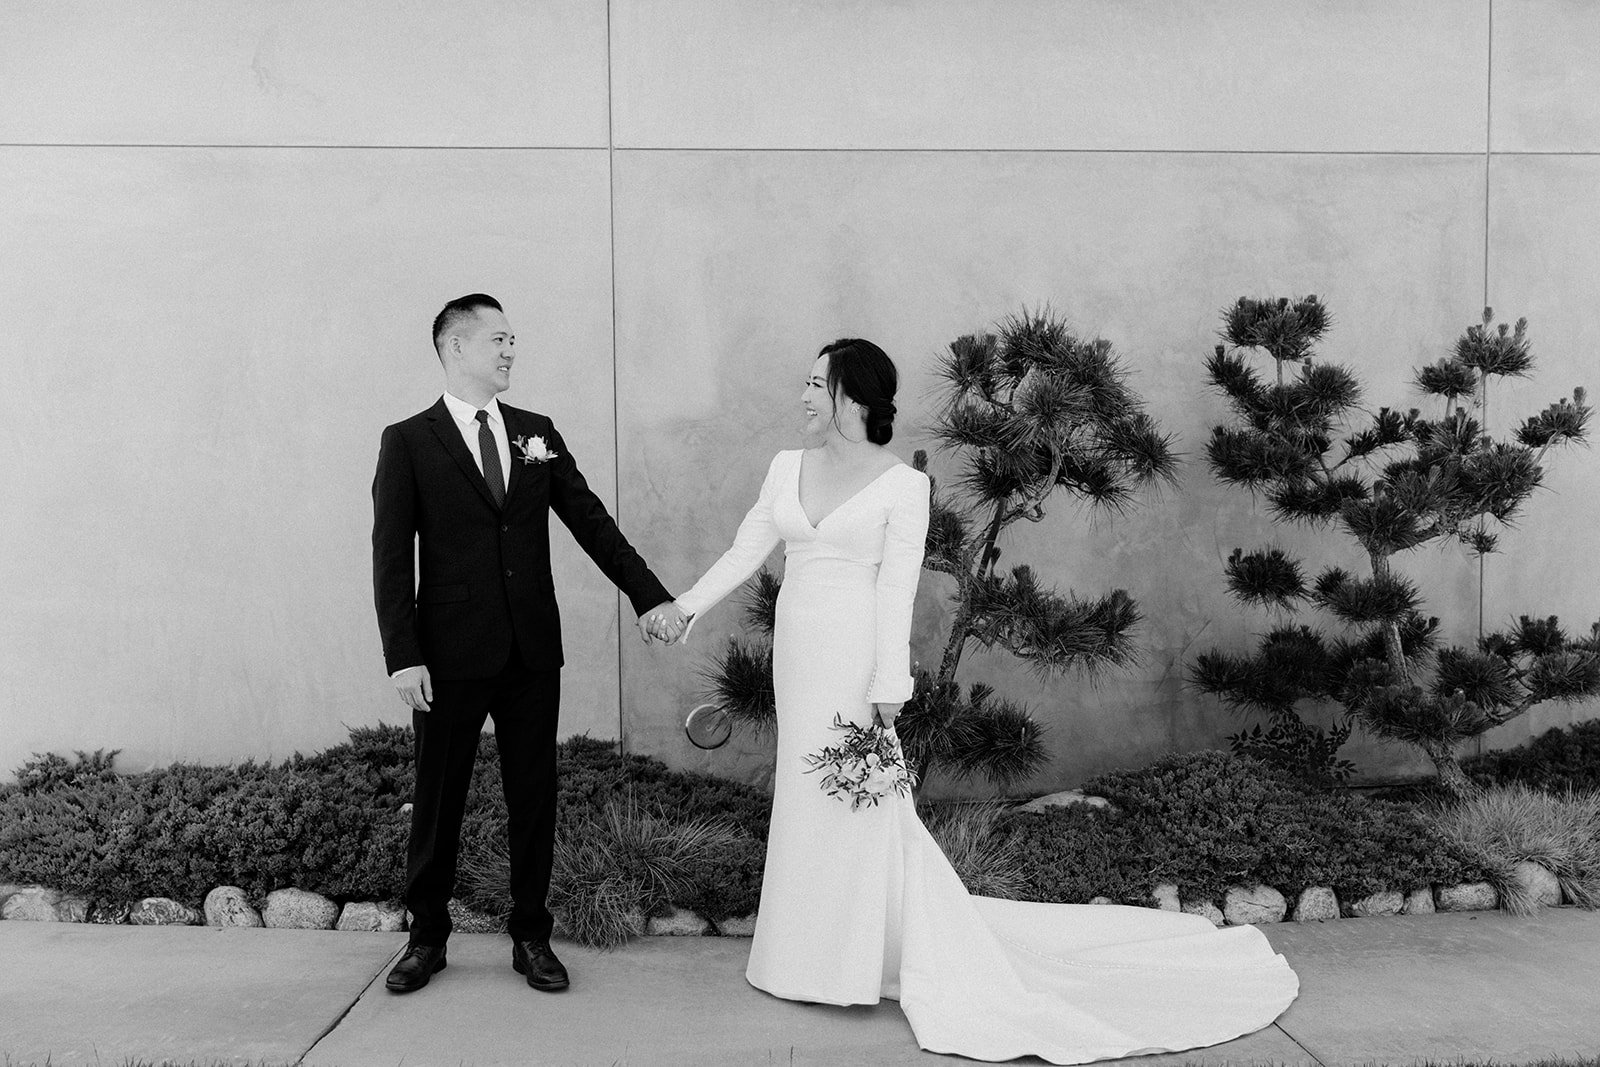 An Intimate Elopement &amp; Rehearsal Dinner In Orange County, CA